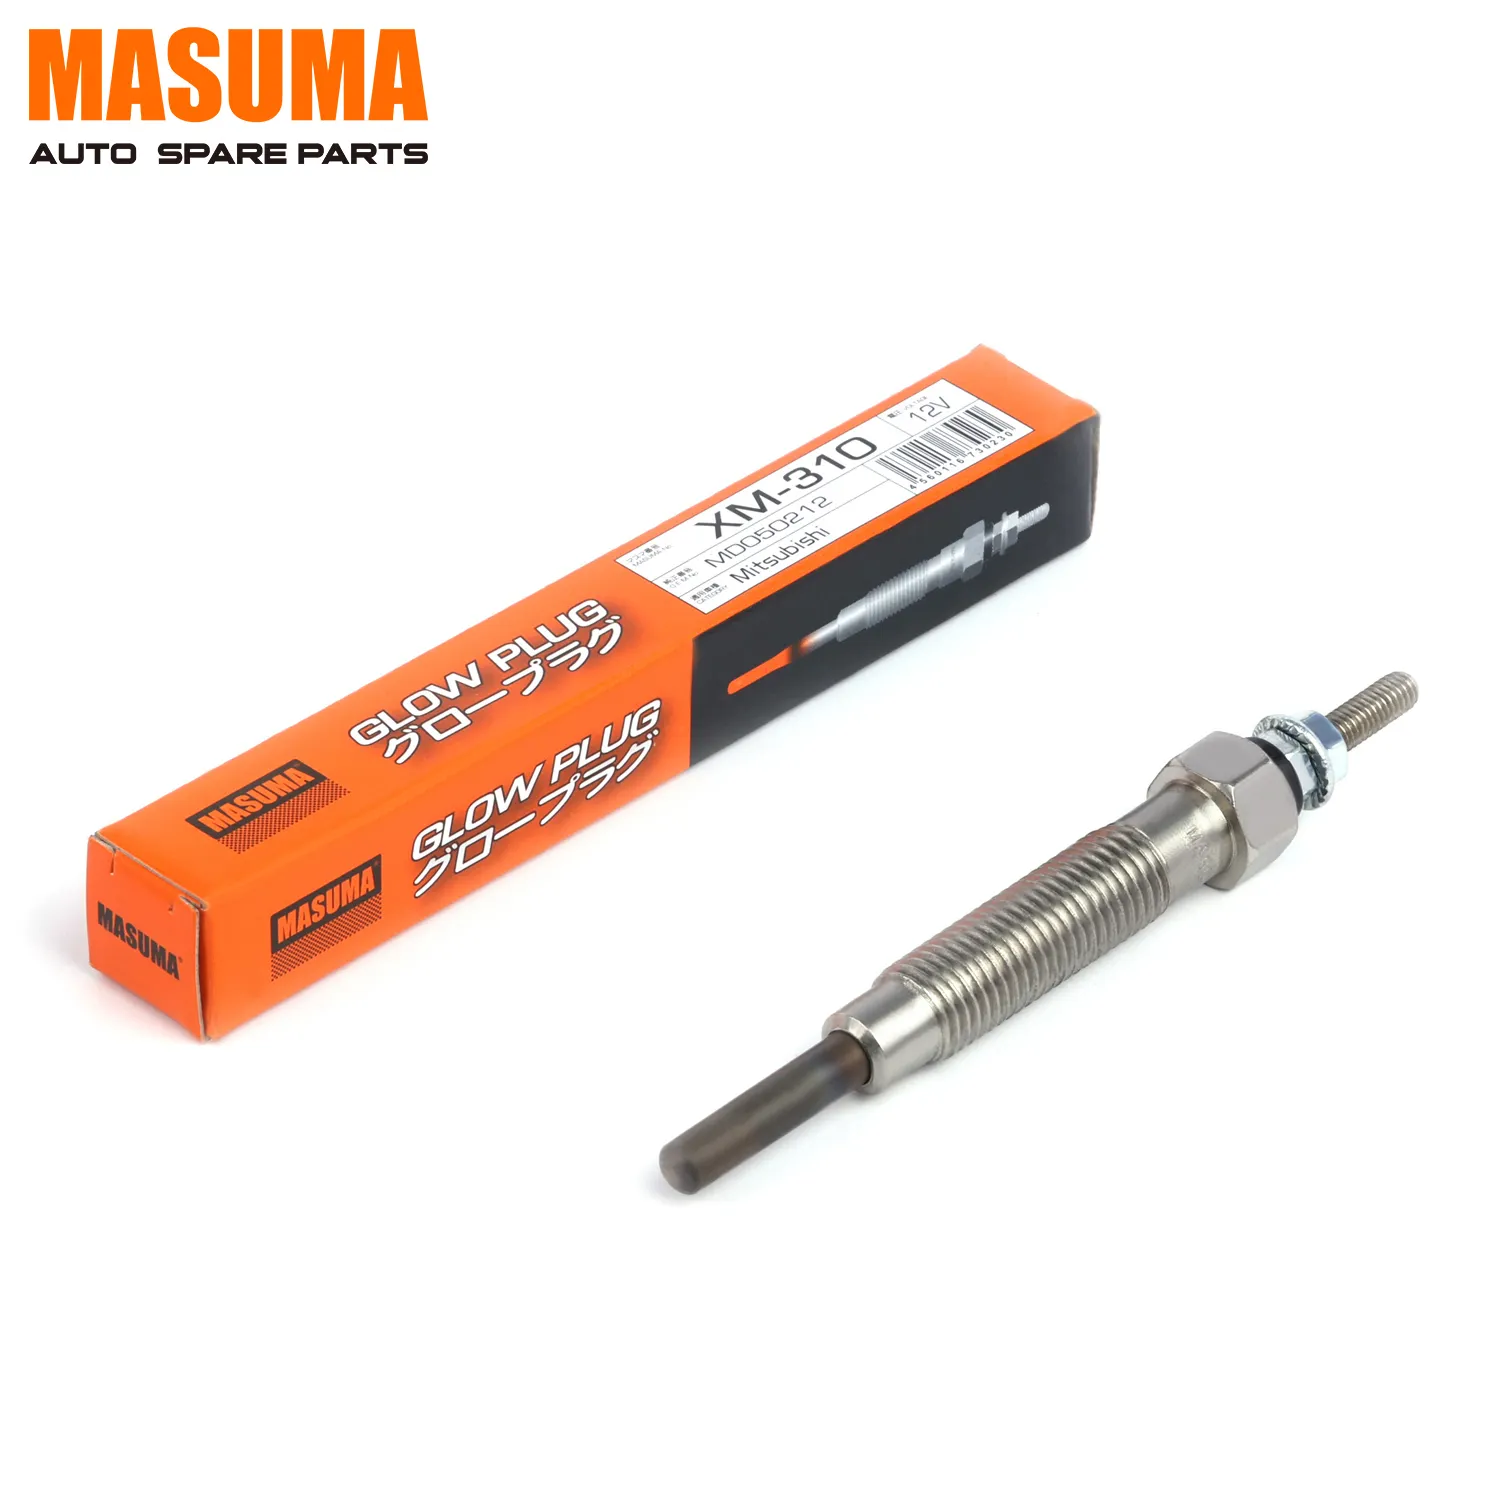 XM-310 MASUMA Auto chauffe-glow plug maille D12B1 <span class=keywords><strong>1200cc</strong></span> MD050212 MD050212 MD070194 pour MITSUBISHI DELICA